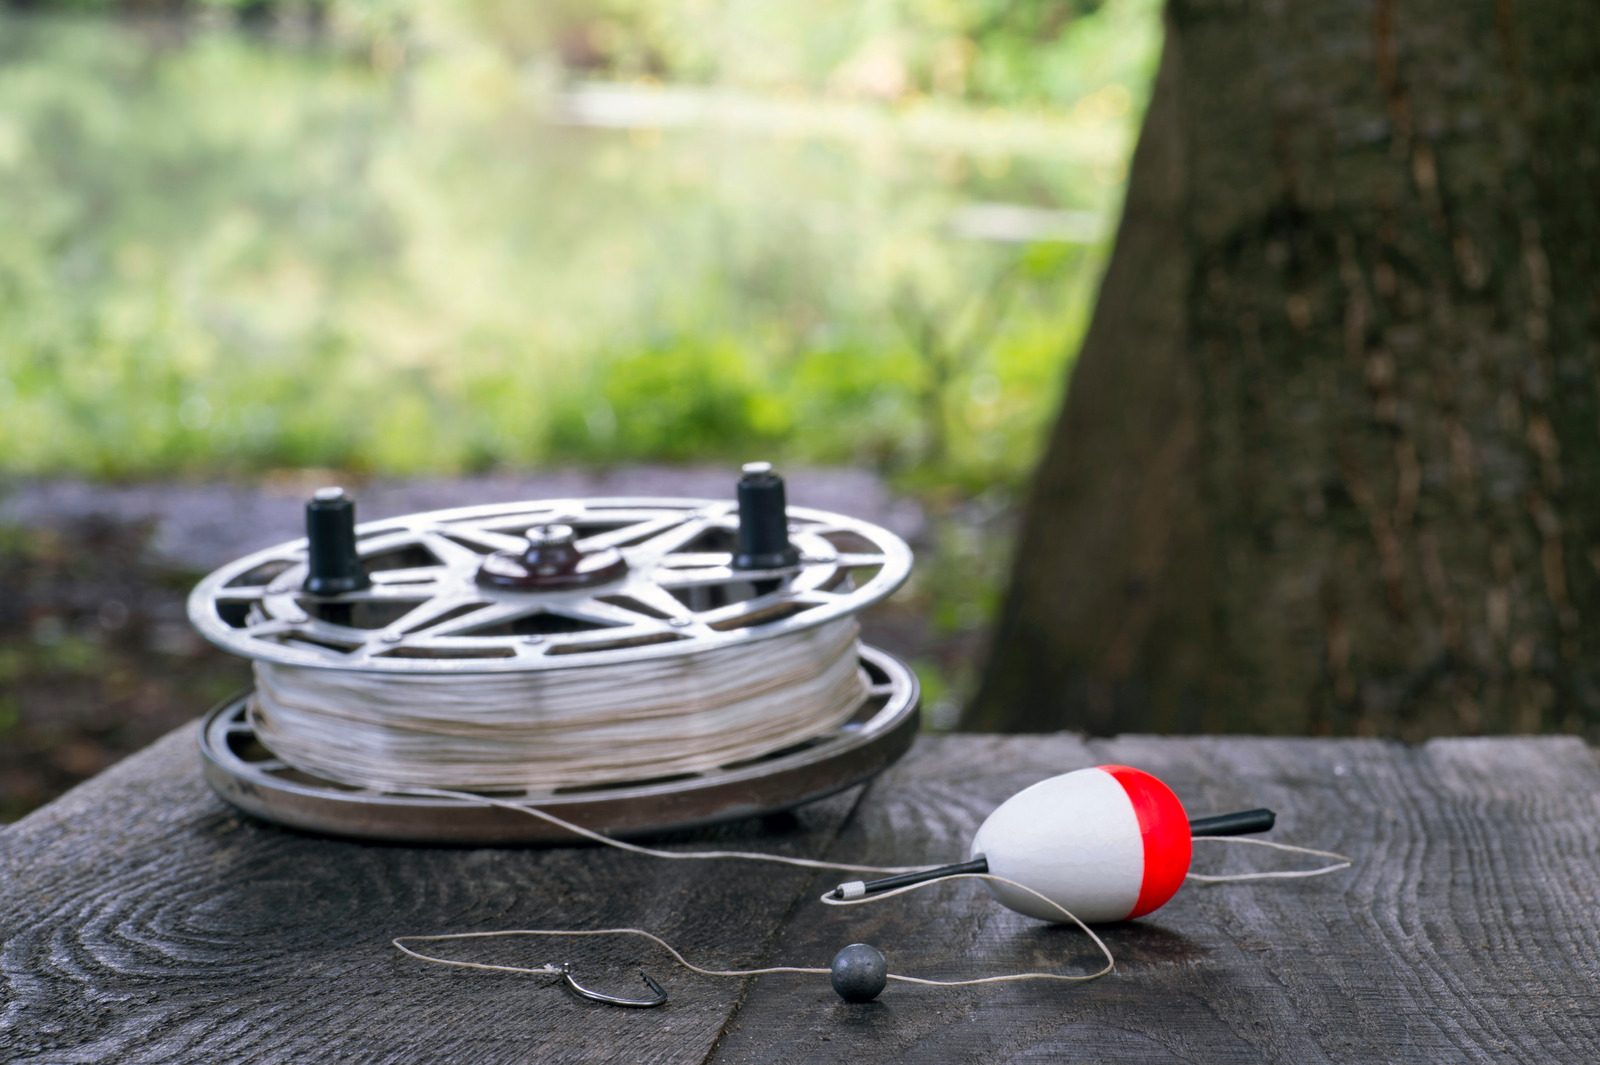 Fishing reel with fishing line, red and white float, hook and sinker on wooden table on natural background. The concept of classic fishing tackle. Text space.